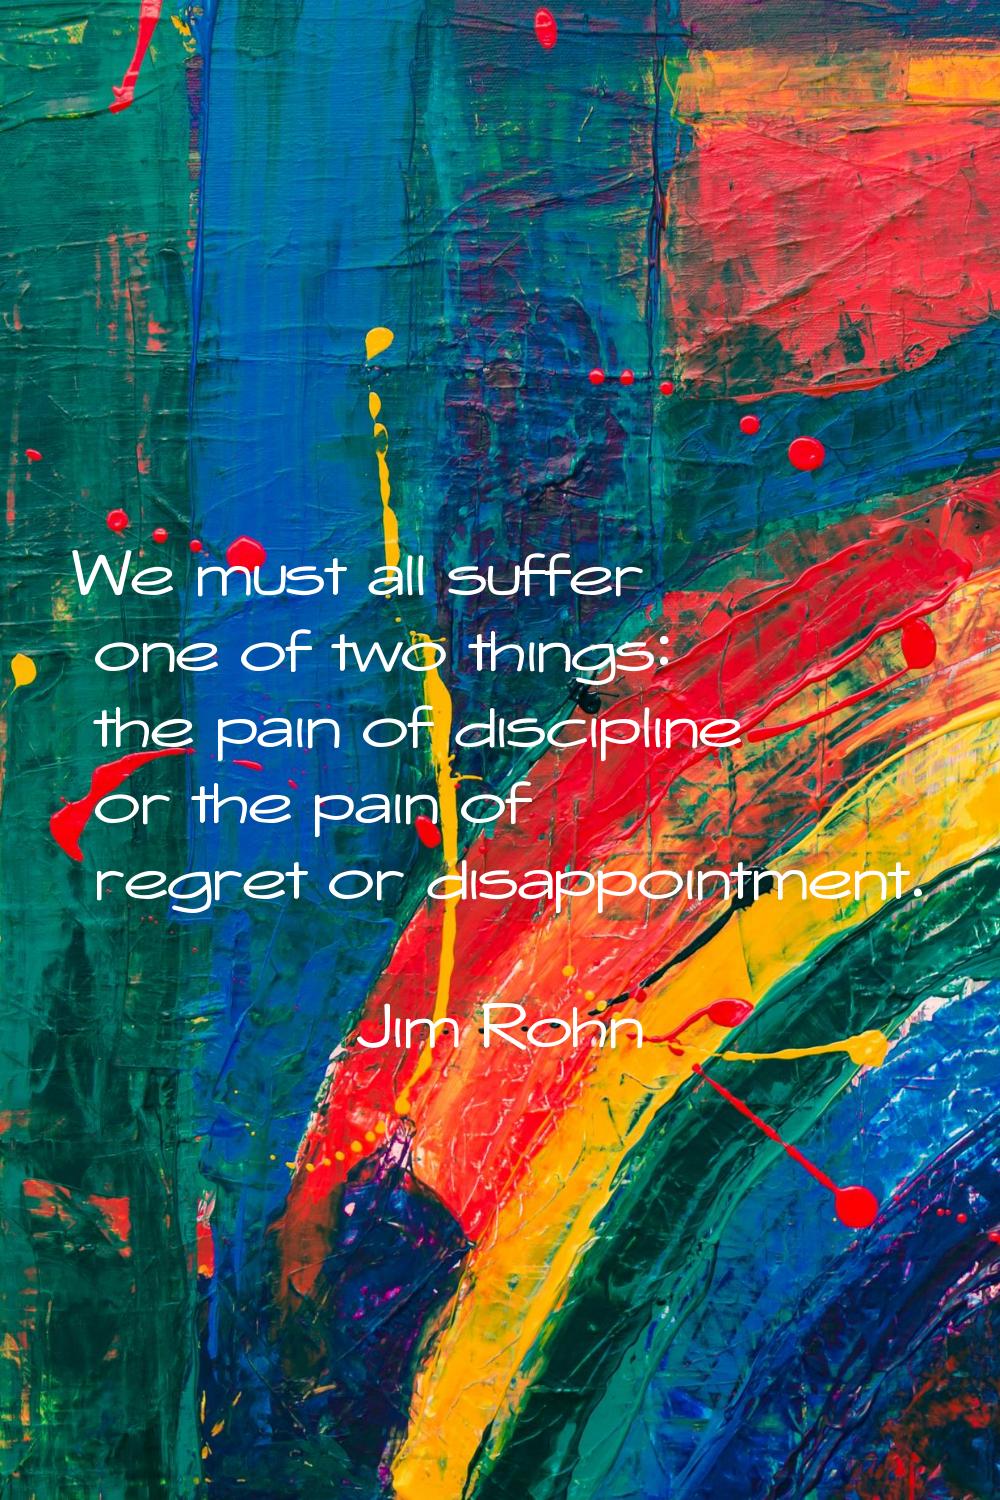 We must all suffer one of two things: the pain of discipline or the pain of regret or disappointmen